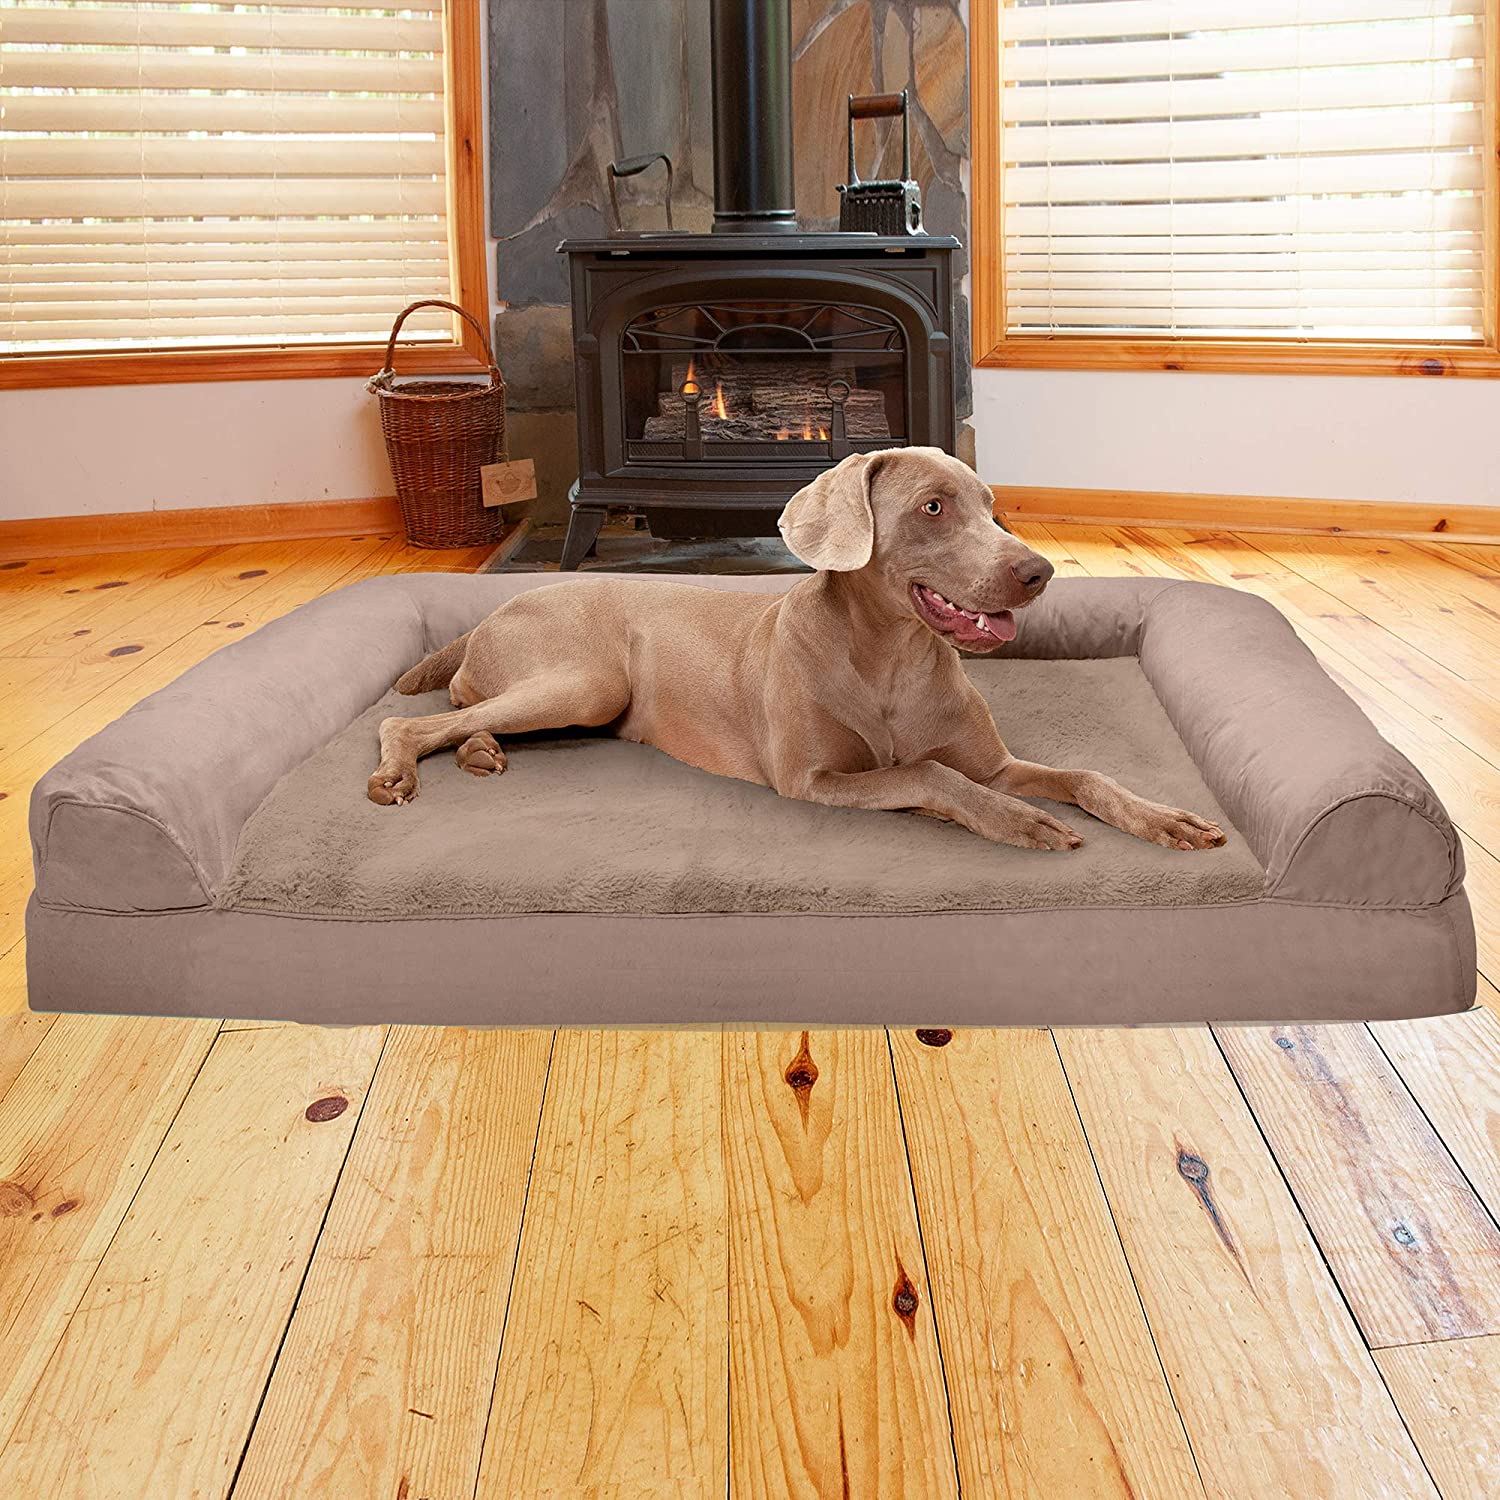 Furhaven XXL Cooling Gel Foam Dog Bed Plush &amp; Suede Sofa-Style w/ Removable Washable Cover - Almondine Jumbo Plus (XX-Large) parallel imported goods 